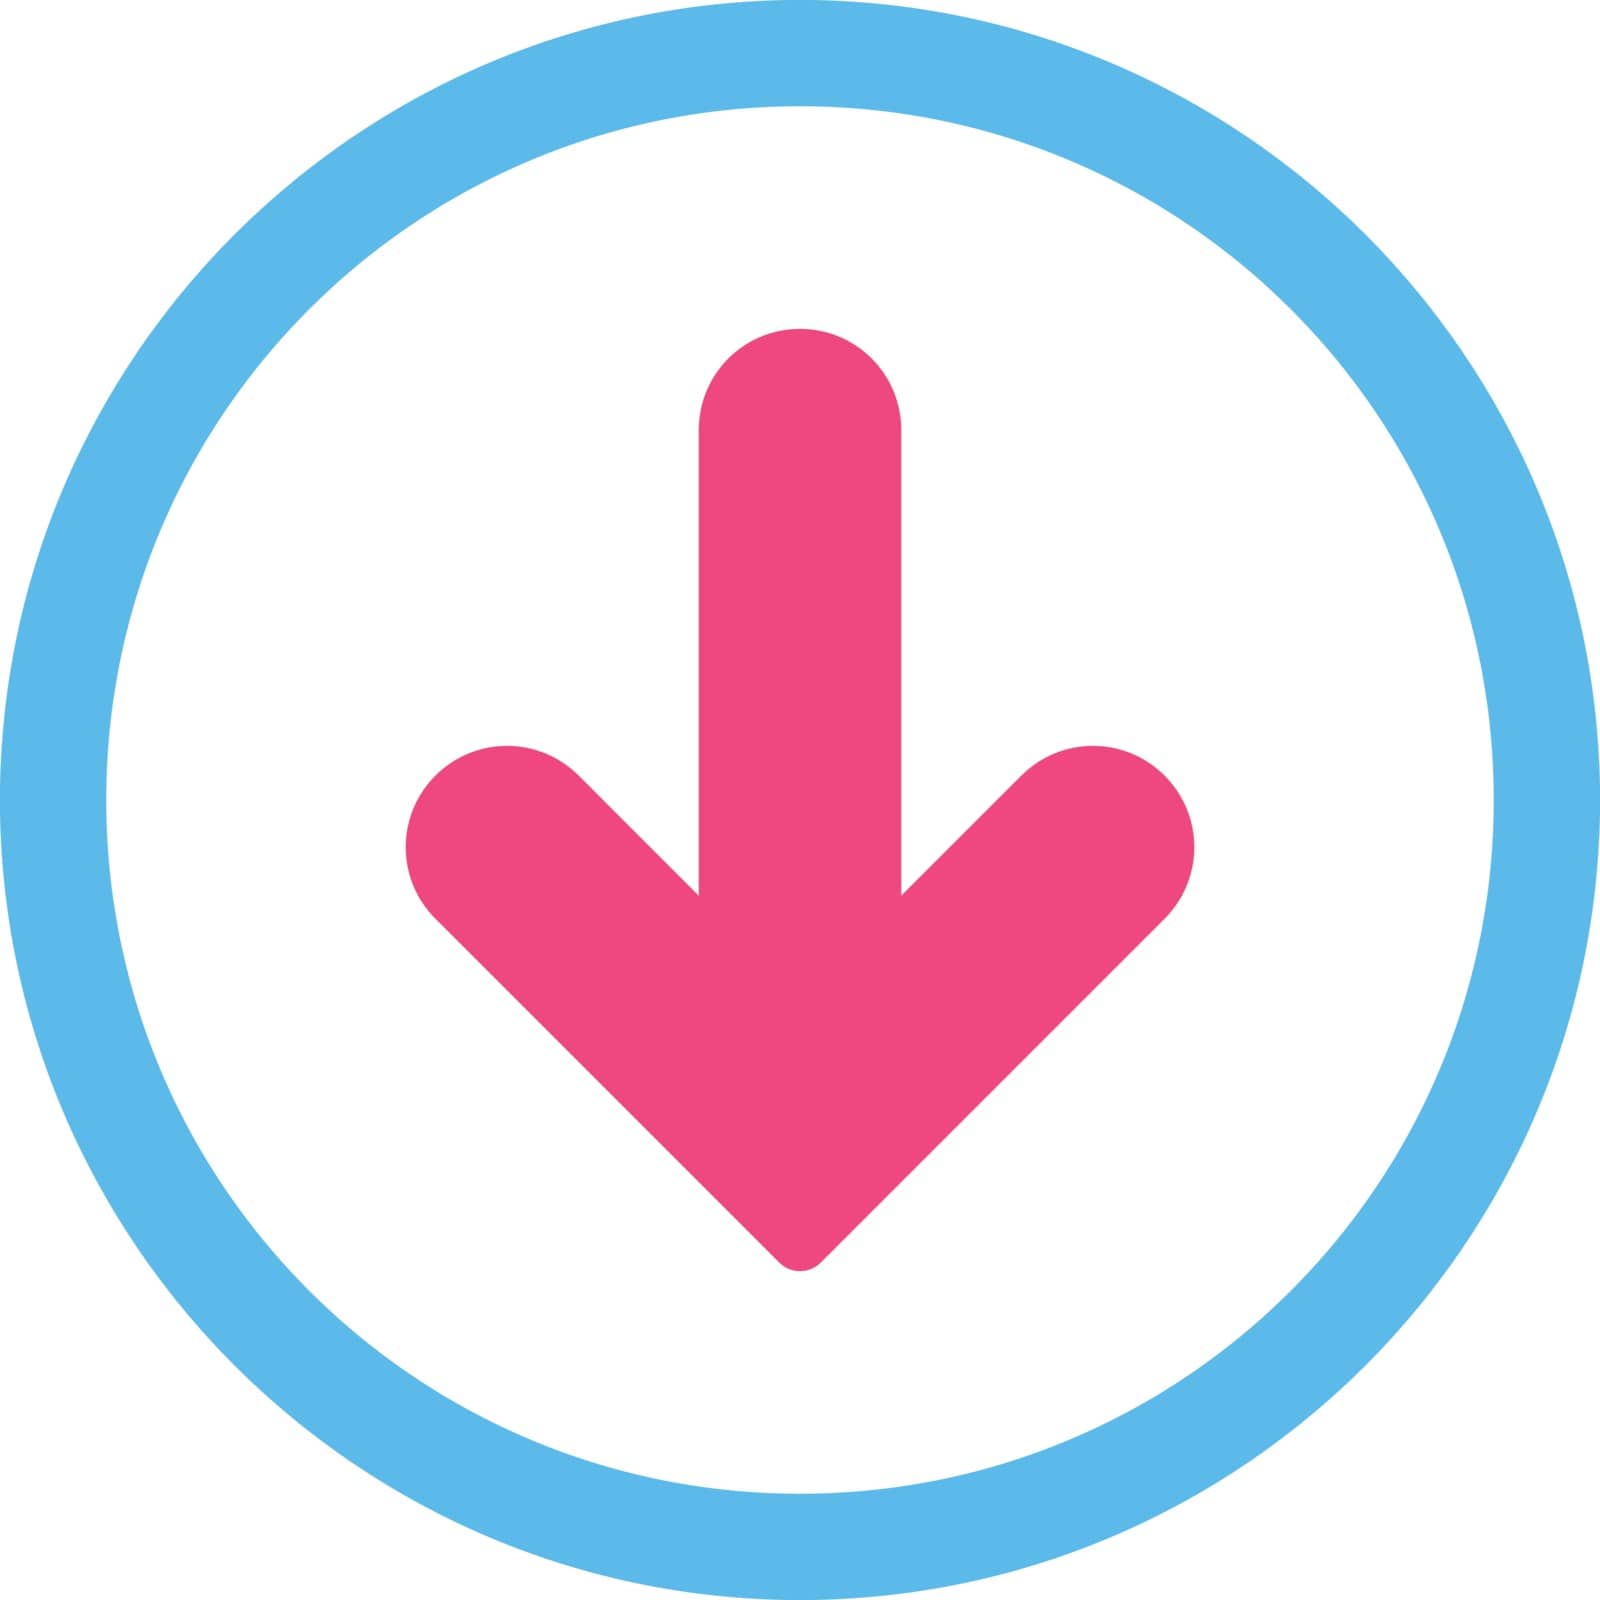 Arrow Down flat pink and blue colors rounded vector icon by ahasoft